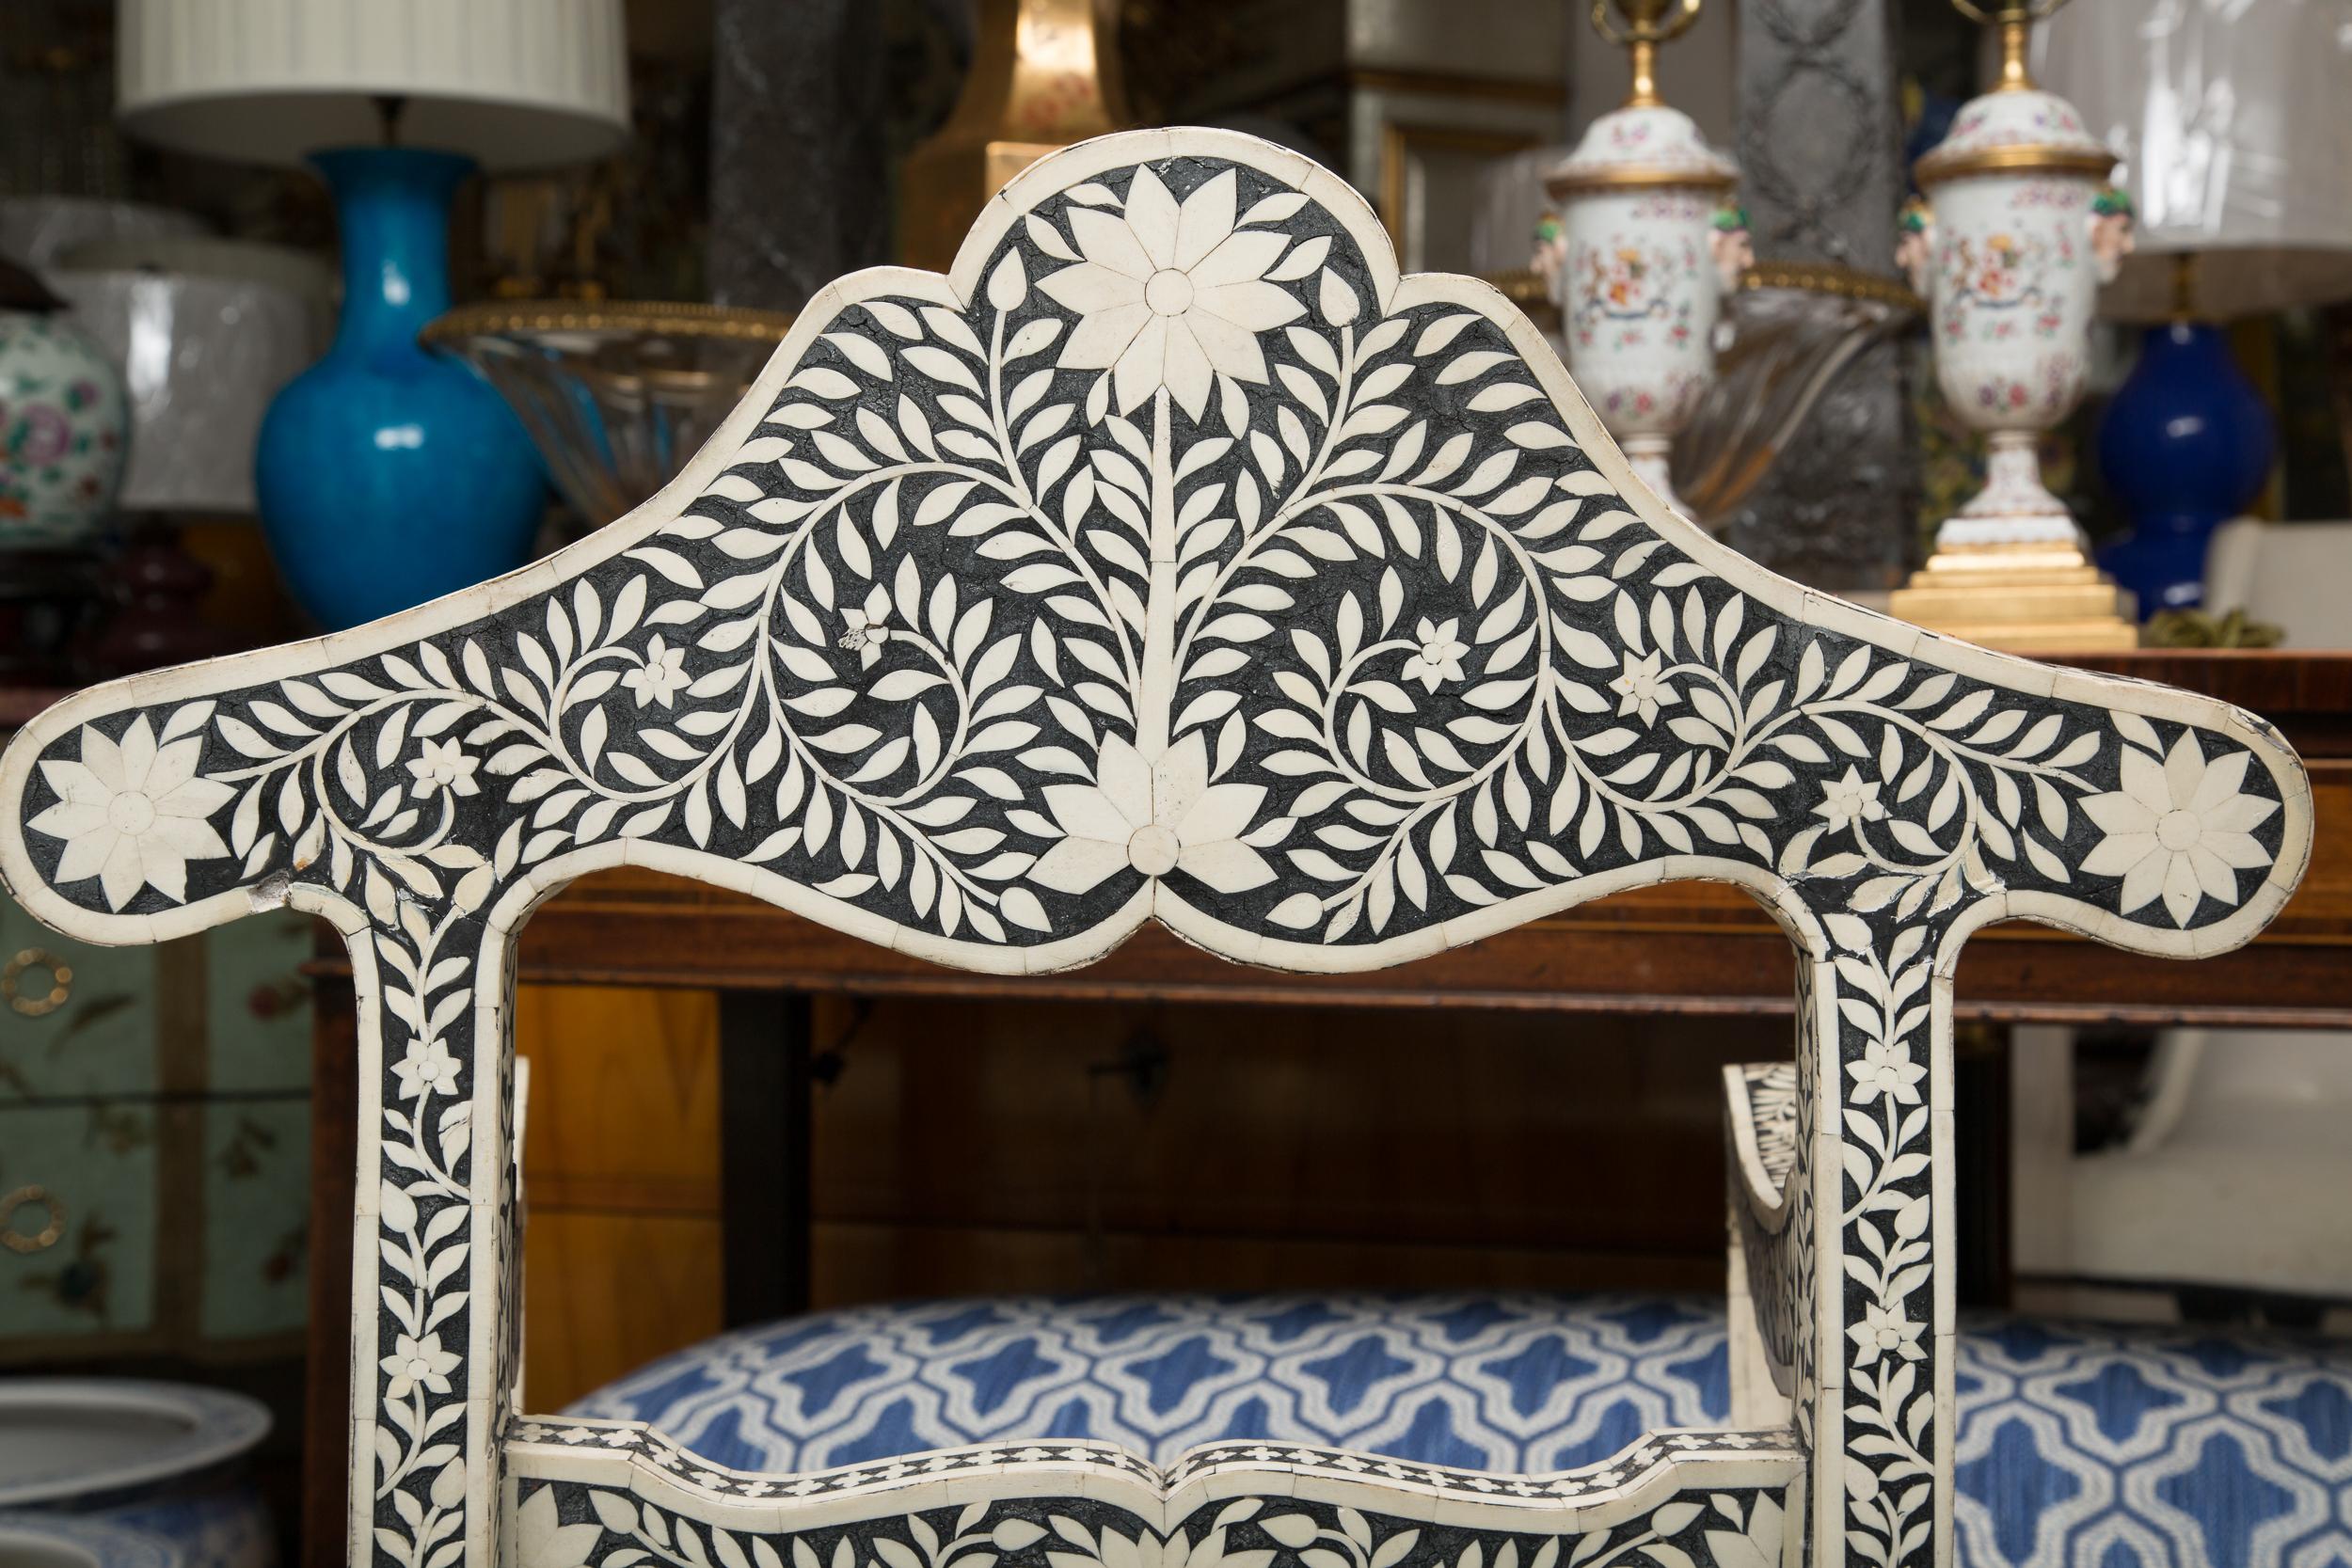 Other Pair of Ebony and Bone Inlaid Moroccan Armchairs